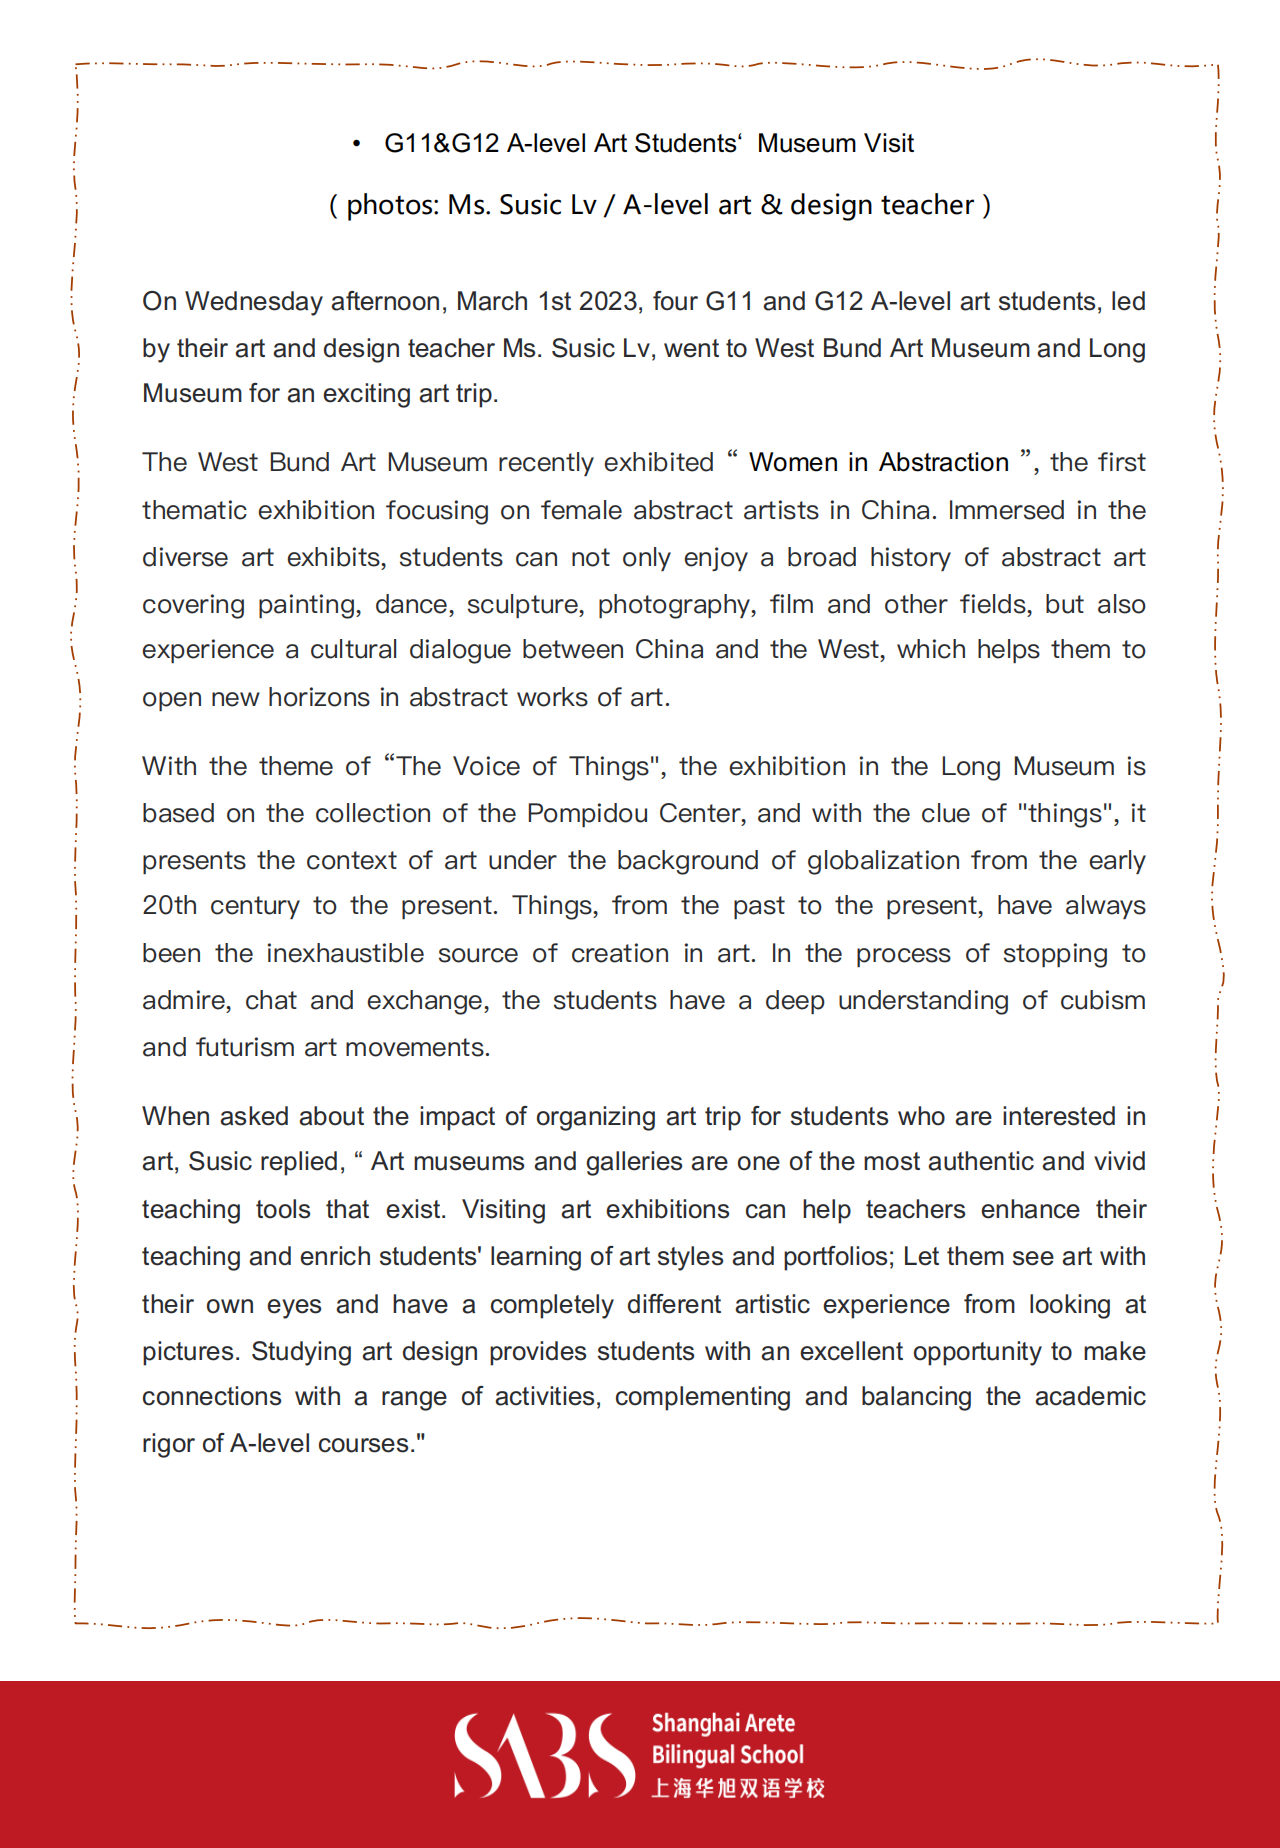 HS 2nd Issue Newsletter pptx（英文）_06.png